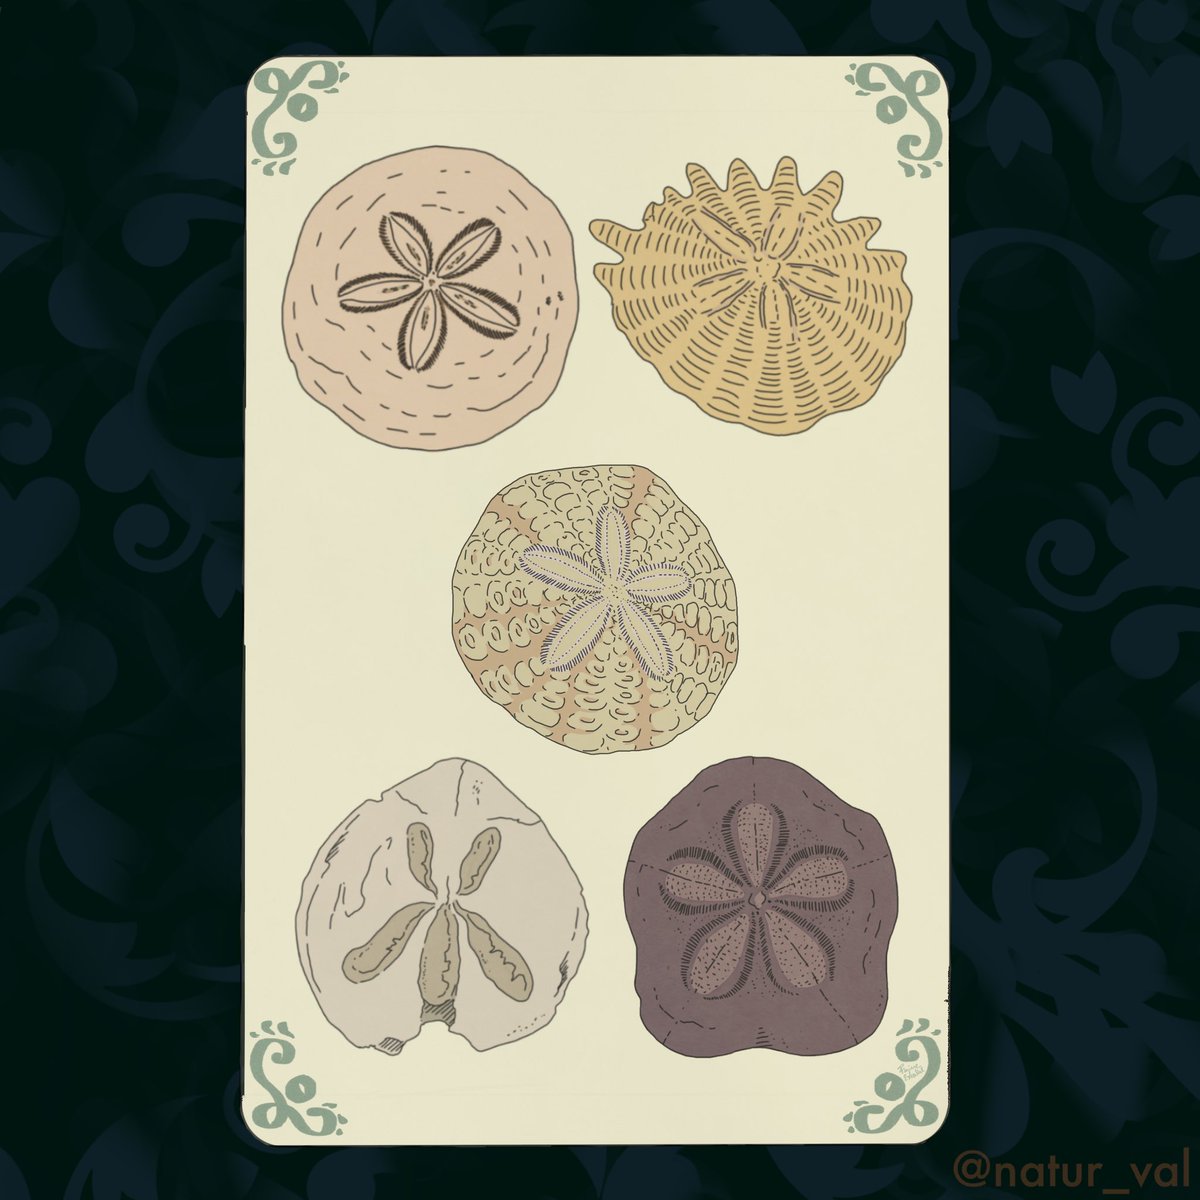 Tarots Before Time - Deniers. The suit of Pentacles. I chose “sand dollars” fossils, i.e. echinoids of the Dendrasteridae family characterized by a rounded and flattened shape that resembles a coin. P.S. There are actually a couple of interlopers from other genres. 5: poverty.